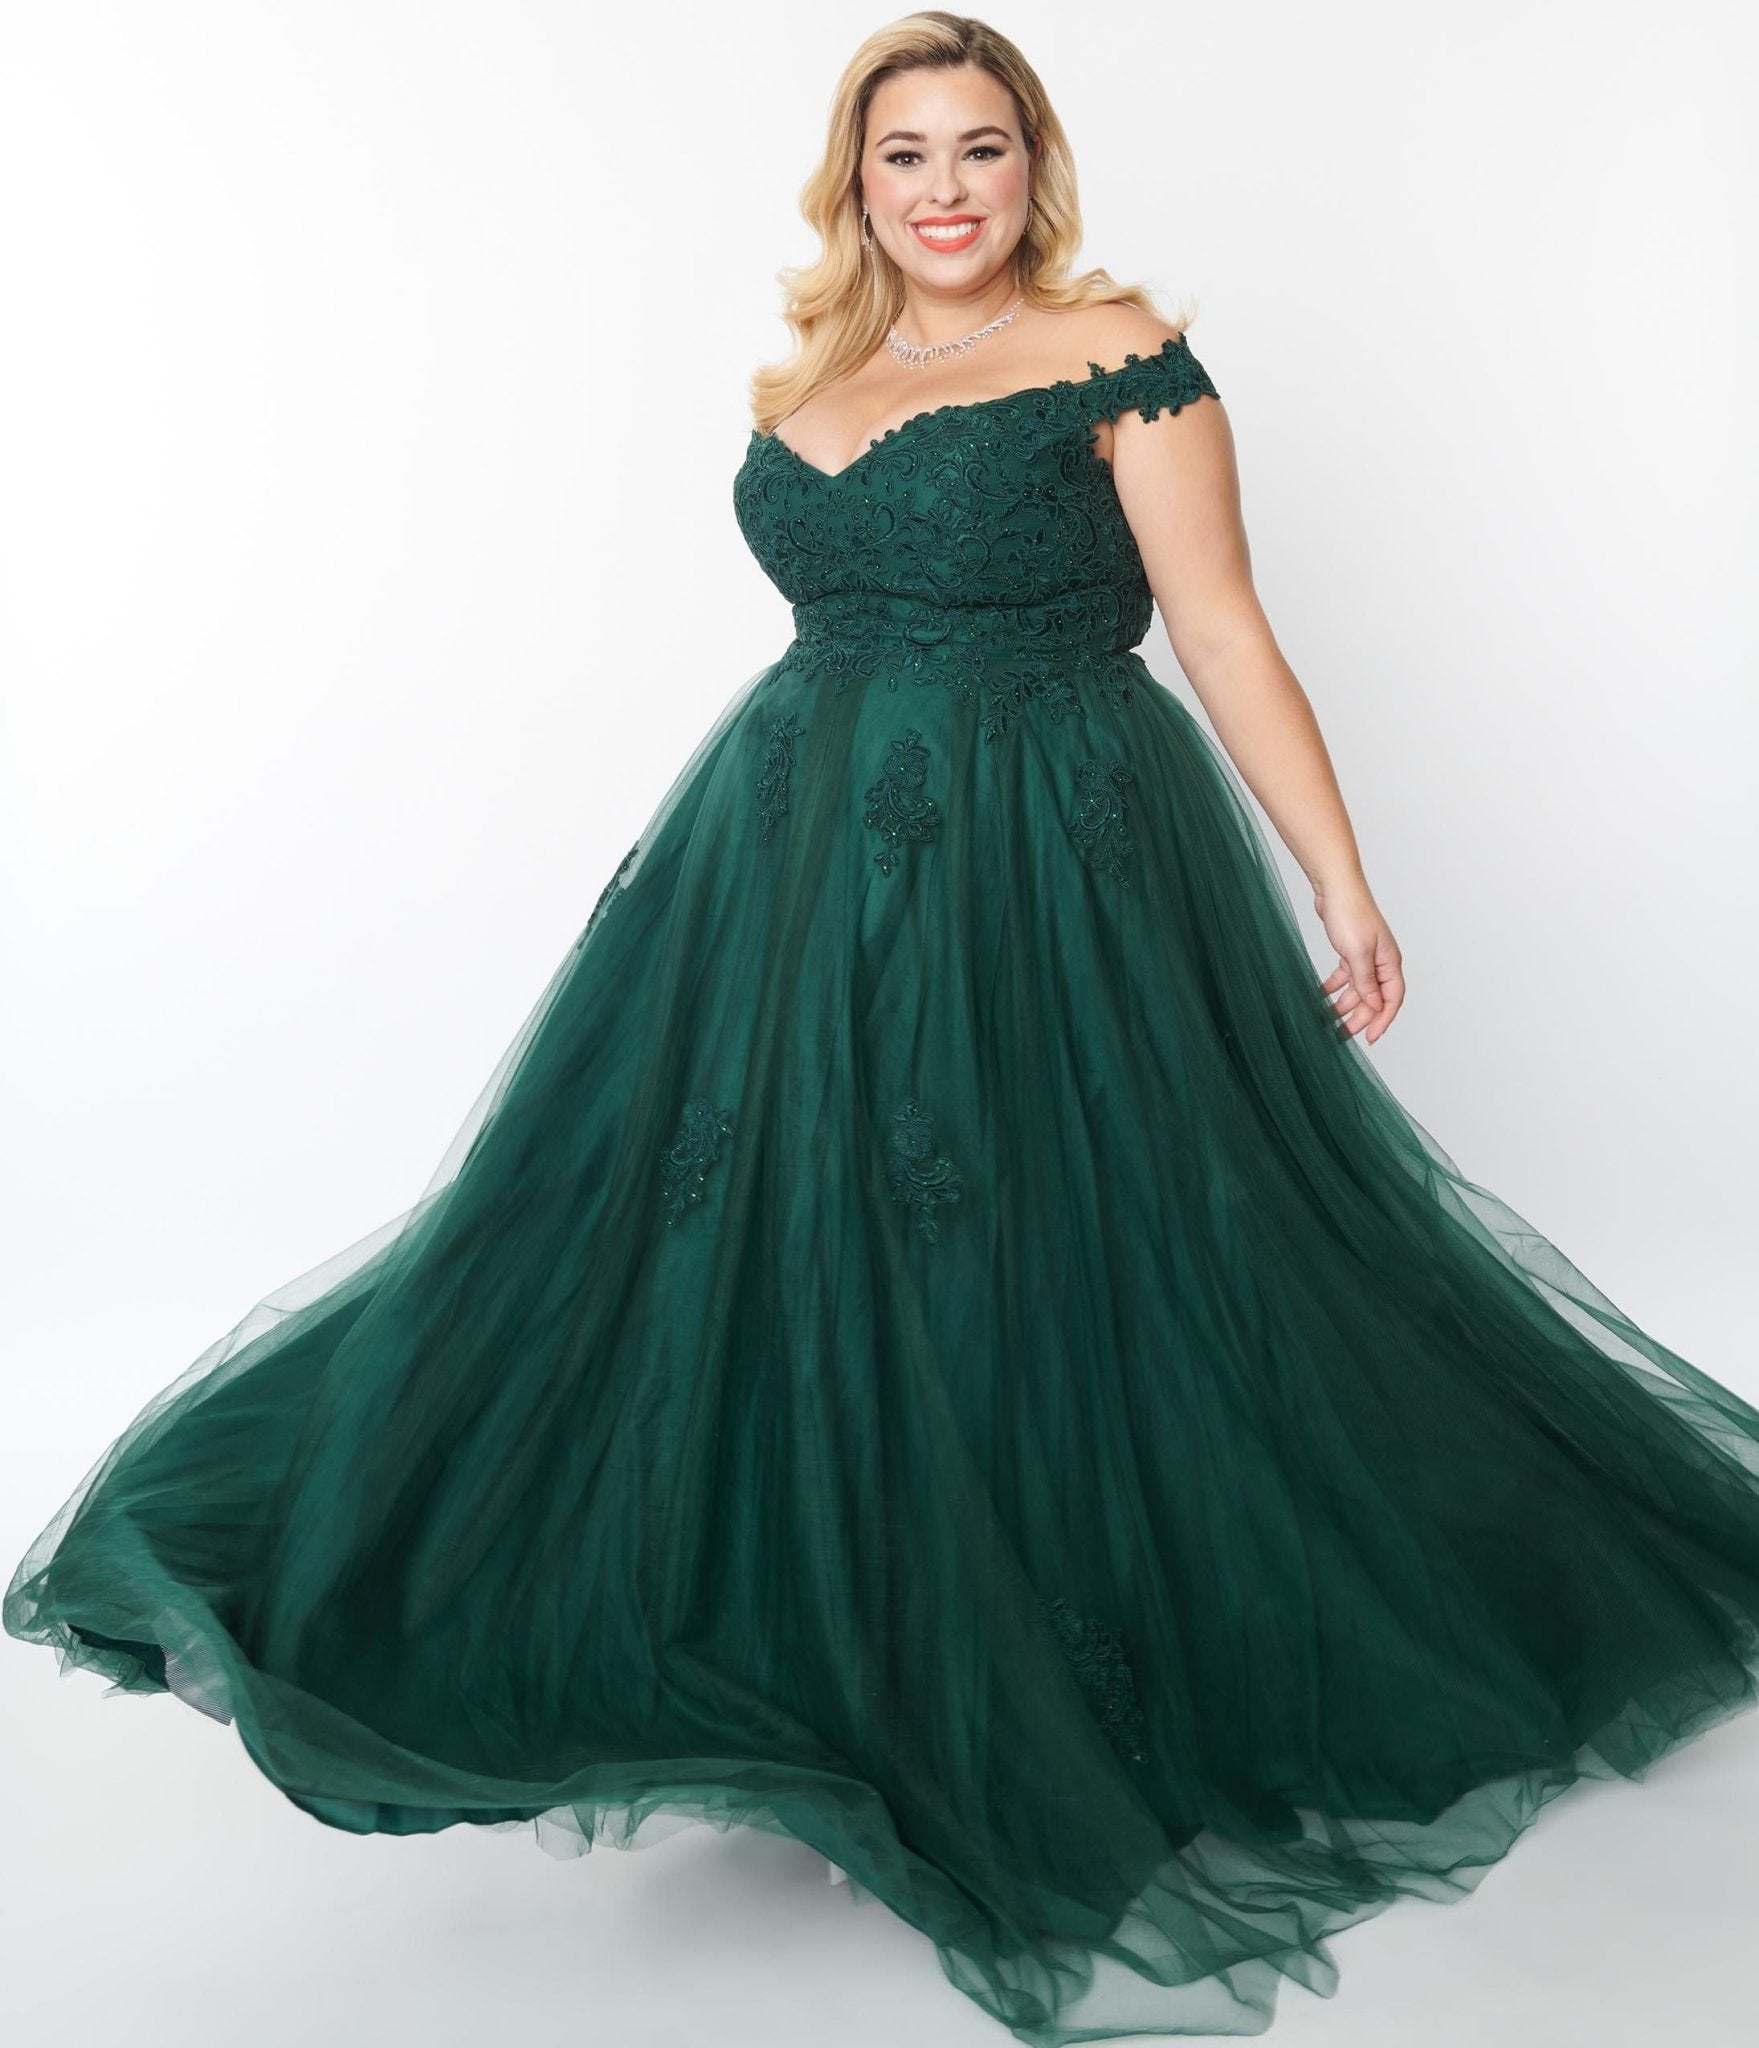 plus size gowns